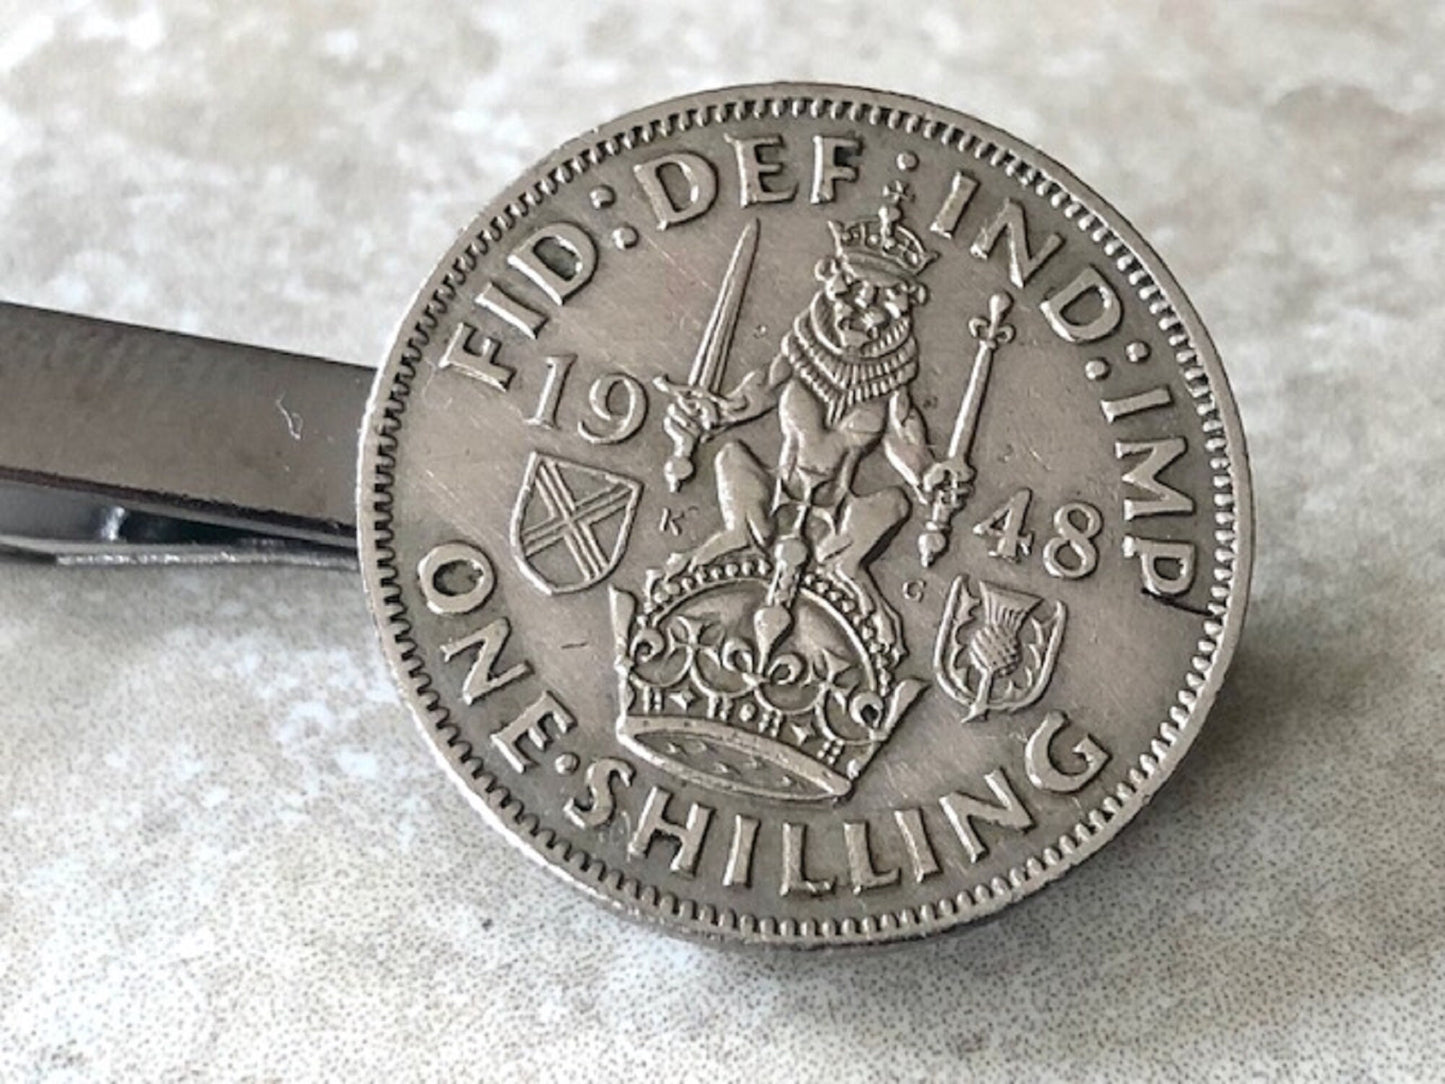 Scotland Coin Tie Clip Scottish UK One Shilling Custom Charm Gift For Friend Coin Charm Gift For Him, Coin Collector, World Coins Suit & Tie